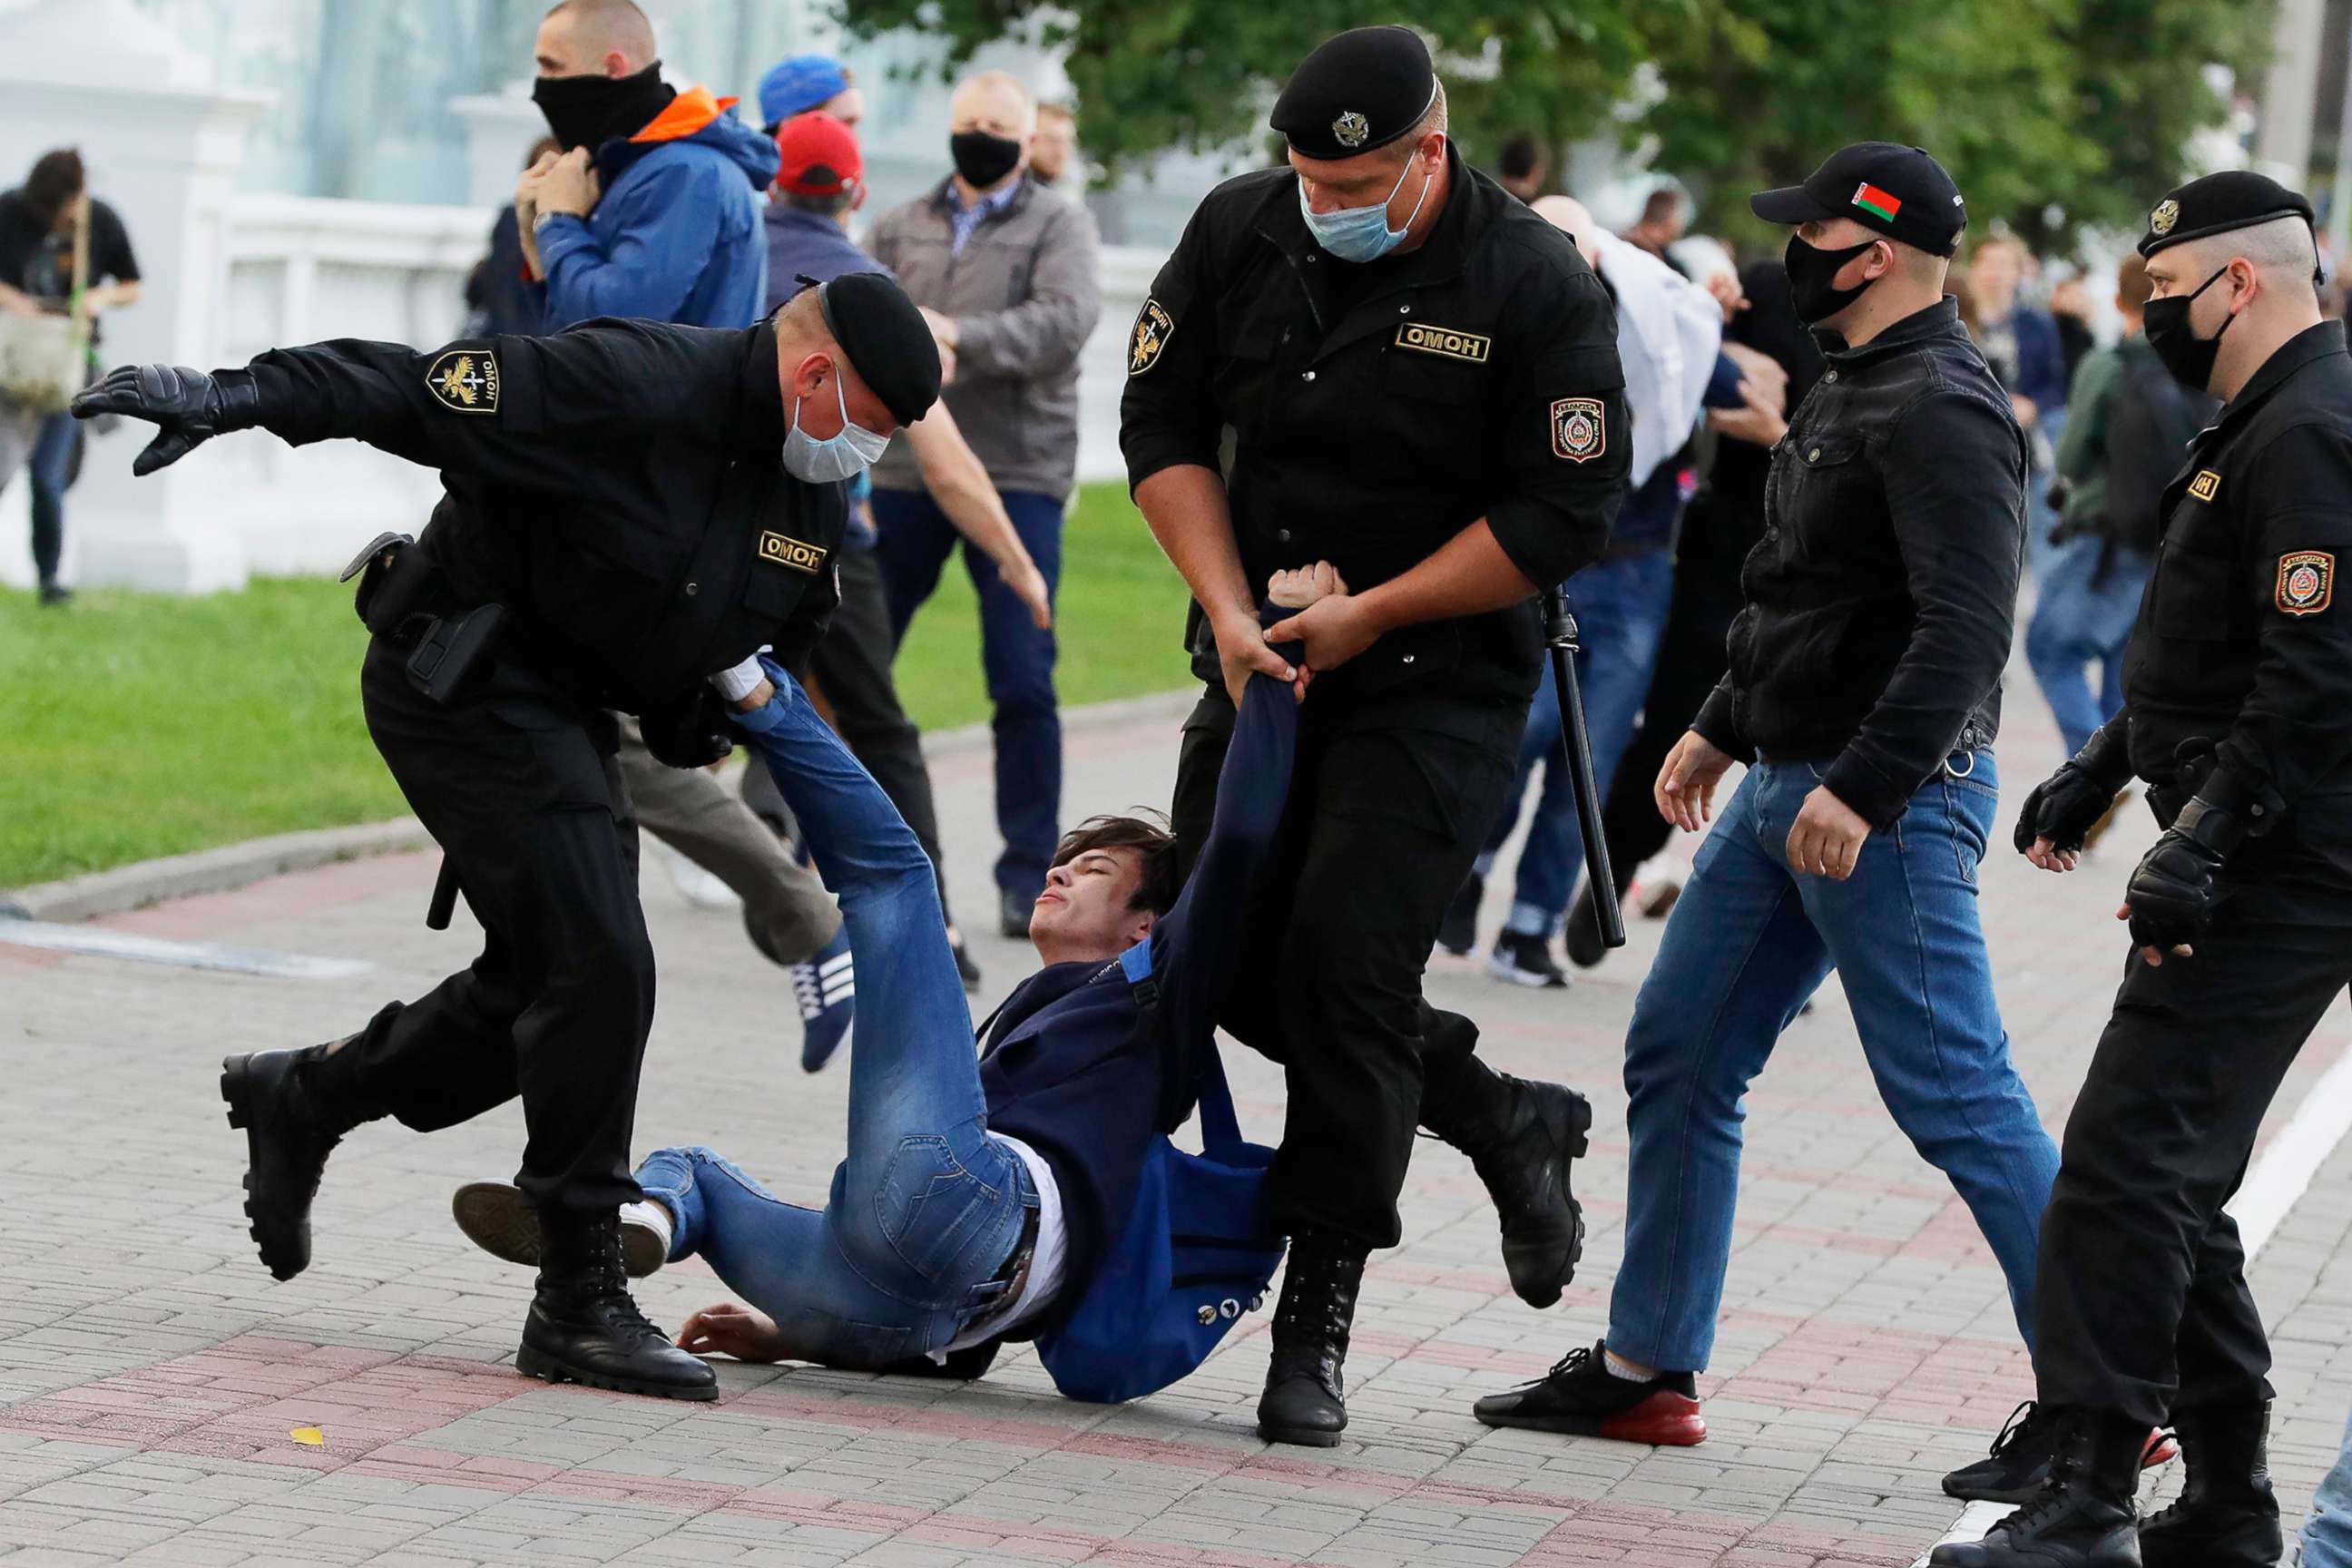 PHOTO: Police officers detain a protester during a rally against the removal of opposition candidates from the presidential elections in Minsk, Belarus, July 14, 2020.